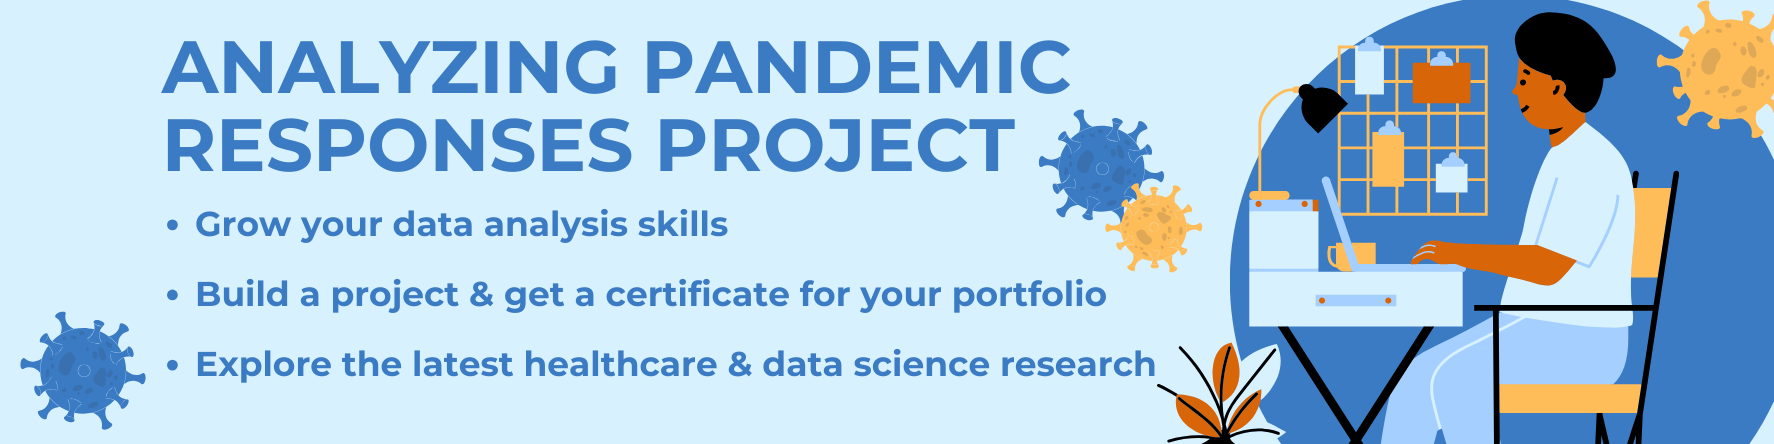 Analyzing Pandemic Responses Project advert